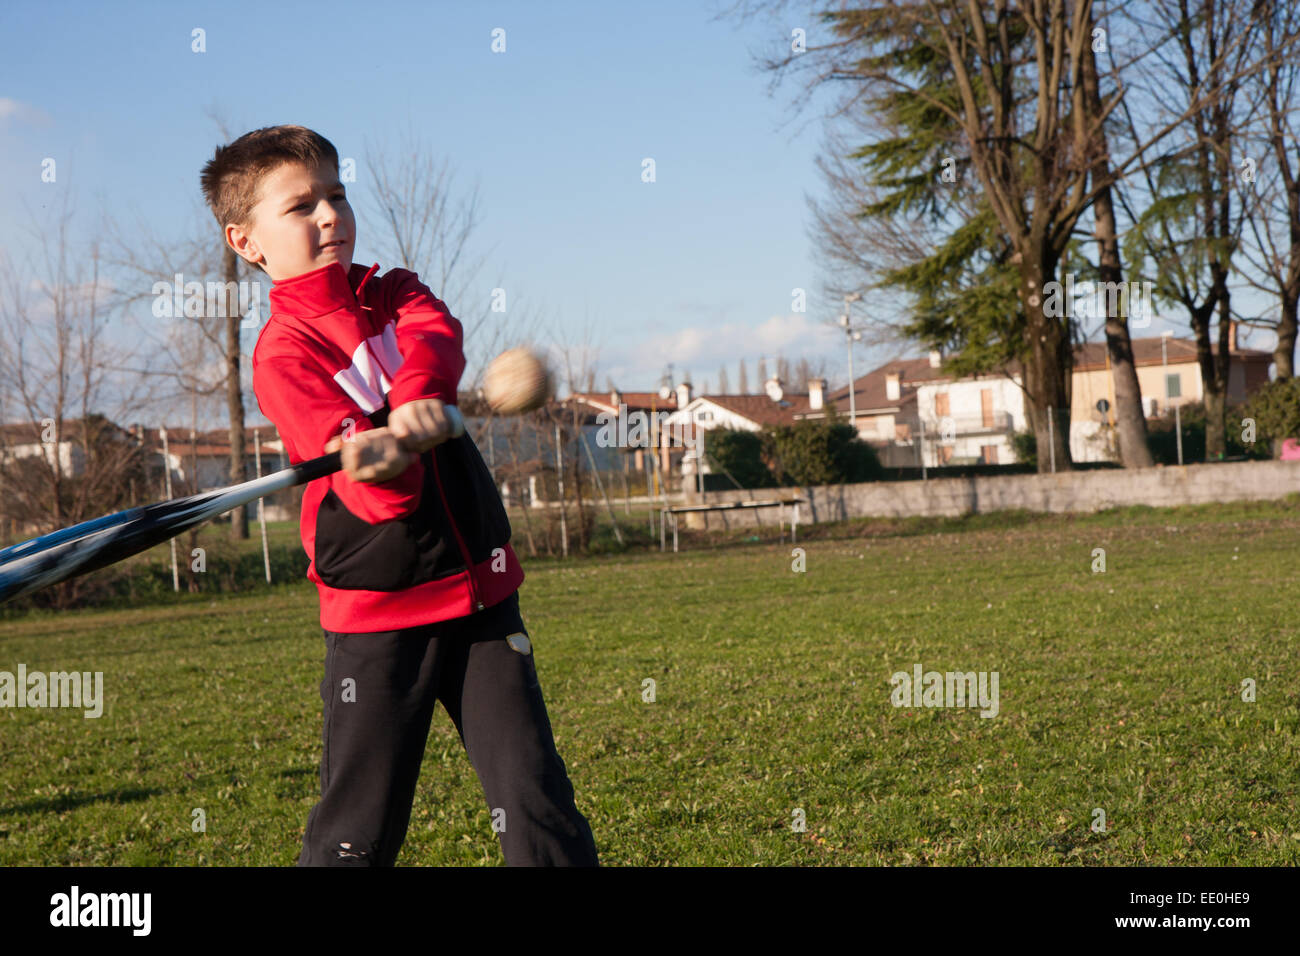 child with red plush that plays baseball Stock Photo